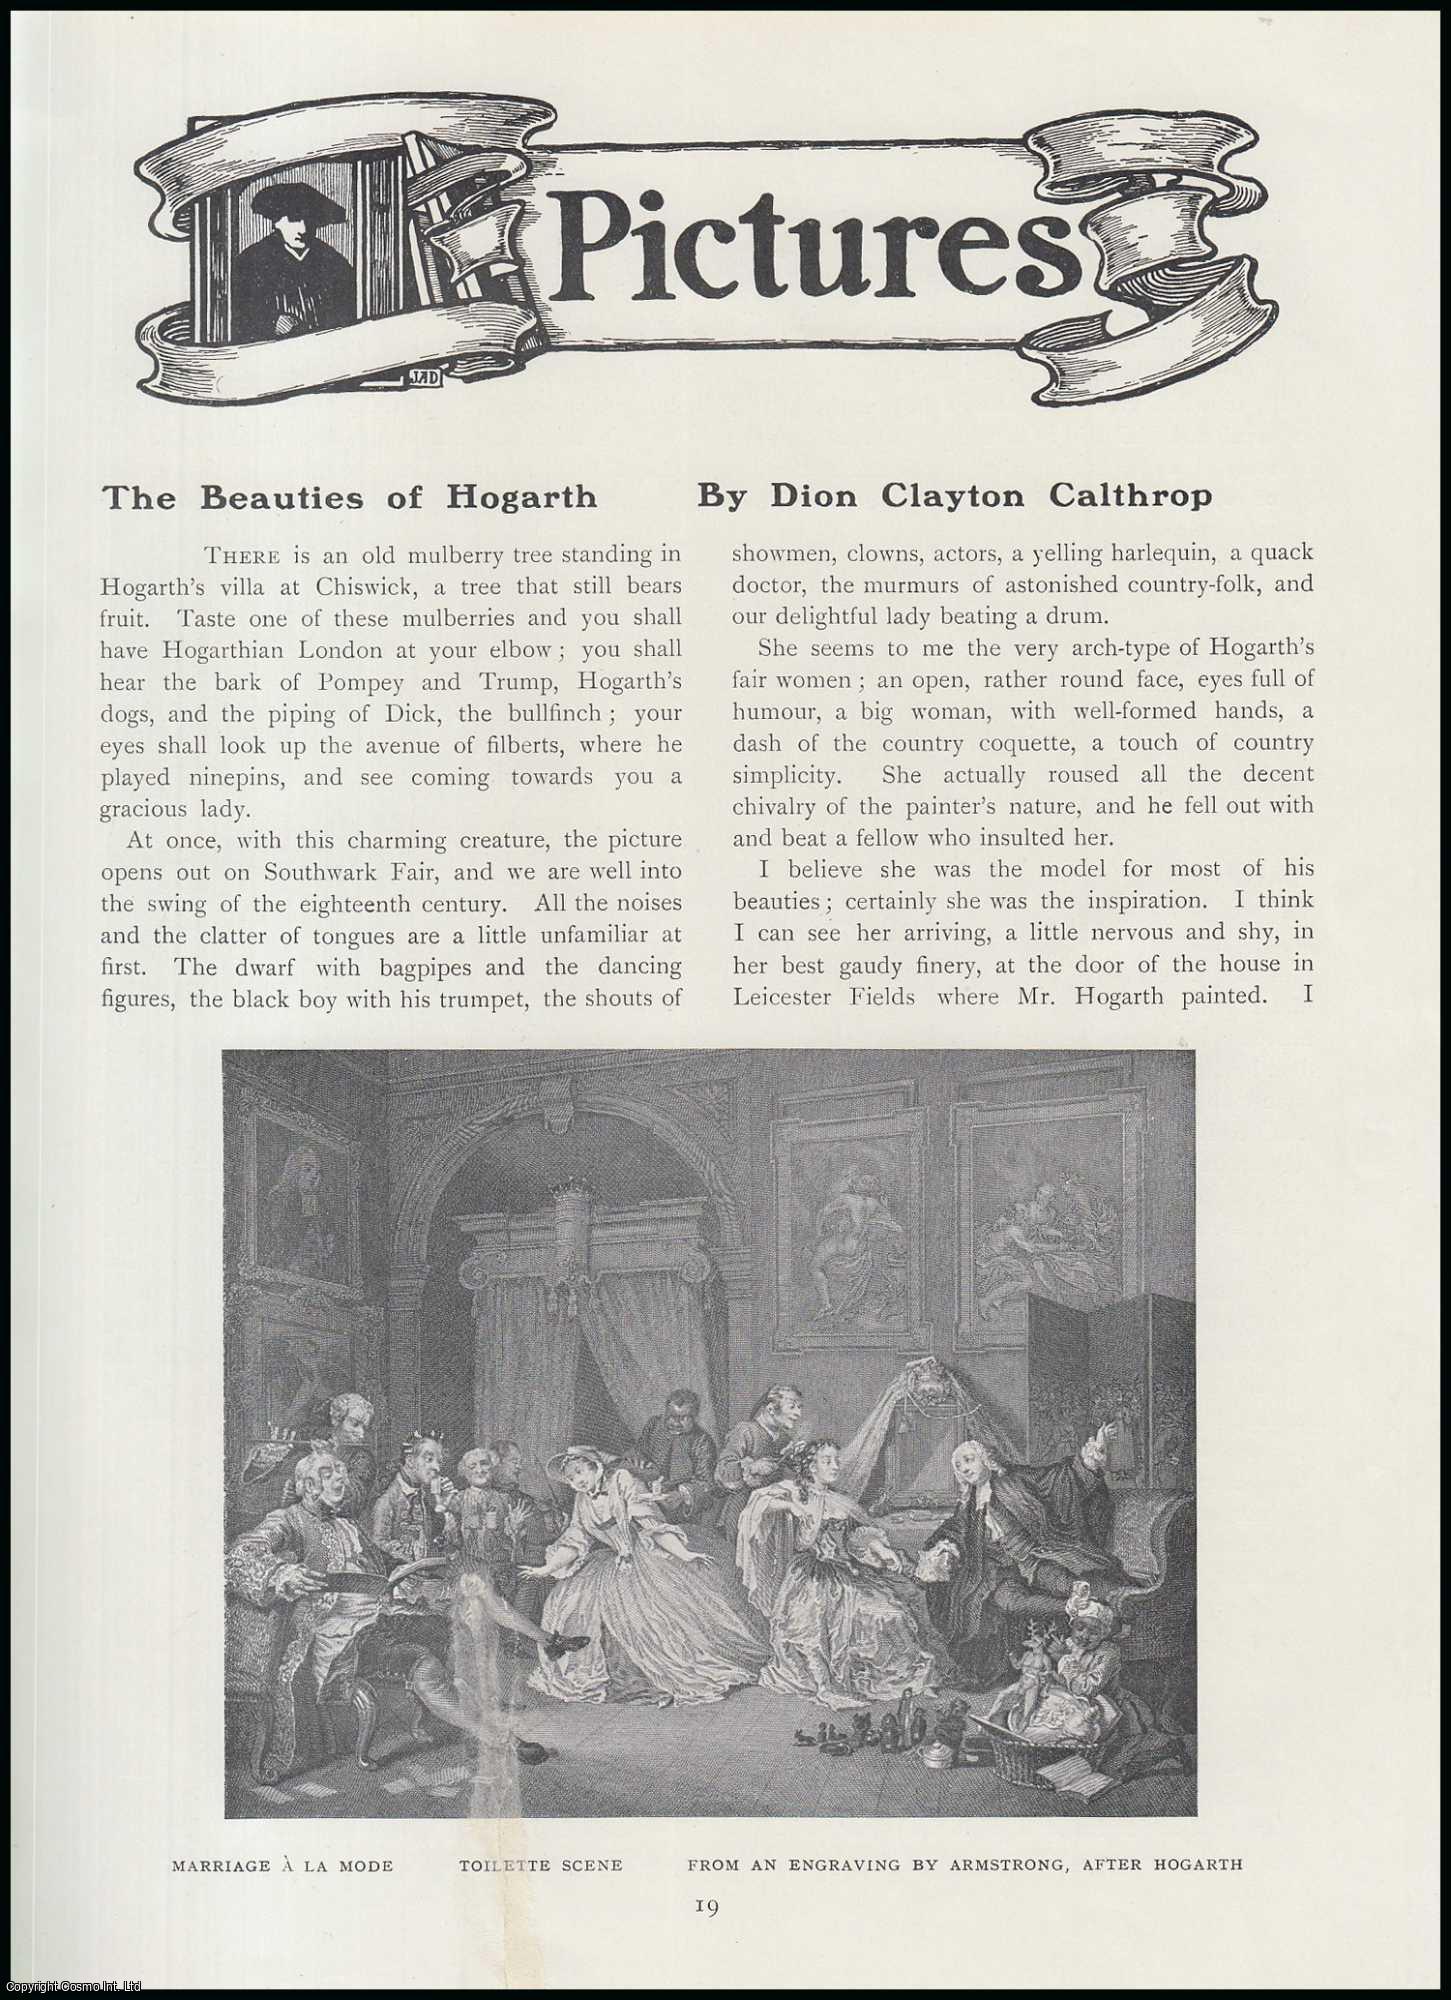 Dion Clayton Calthrop - The Beauties. Art Pictures of William Hogarth. An original article from The Connoisseur, 1910.